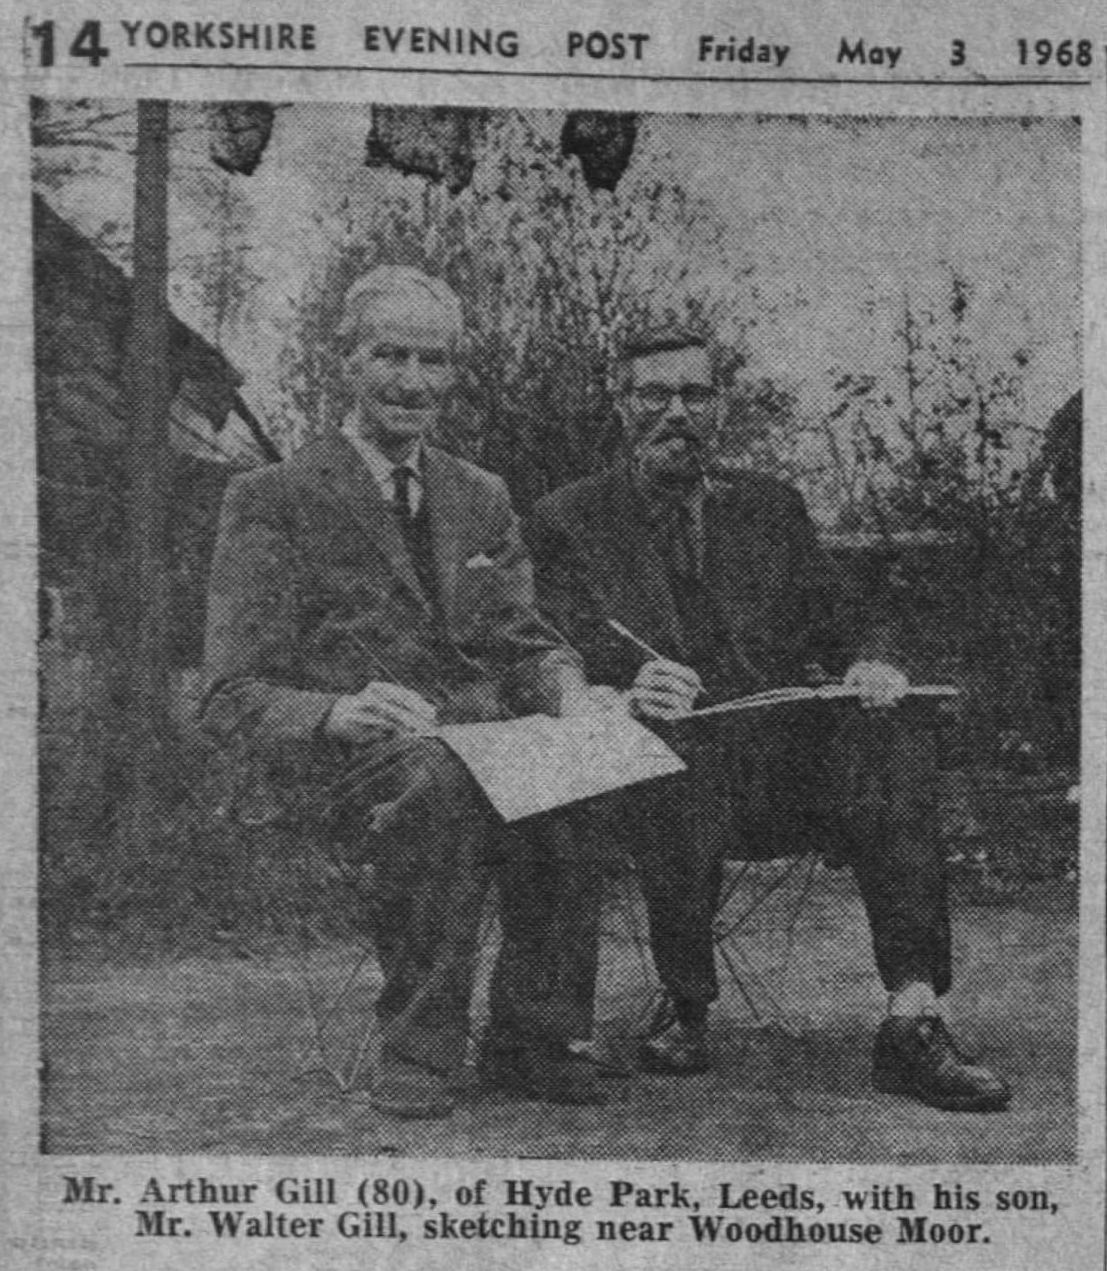 Newspaper clipping with a photo of two men sat on folding camp chairs and holding sketchpads and pencils.